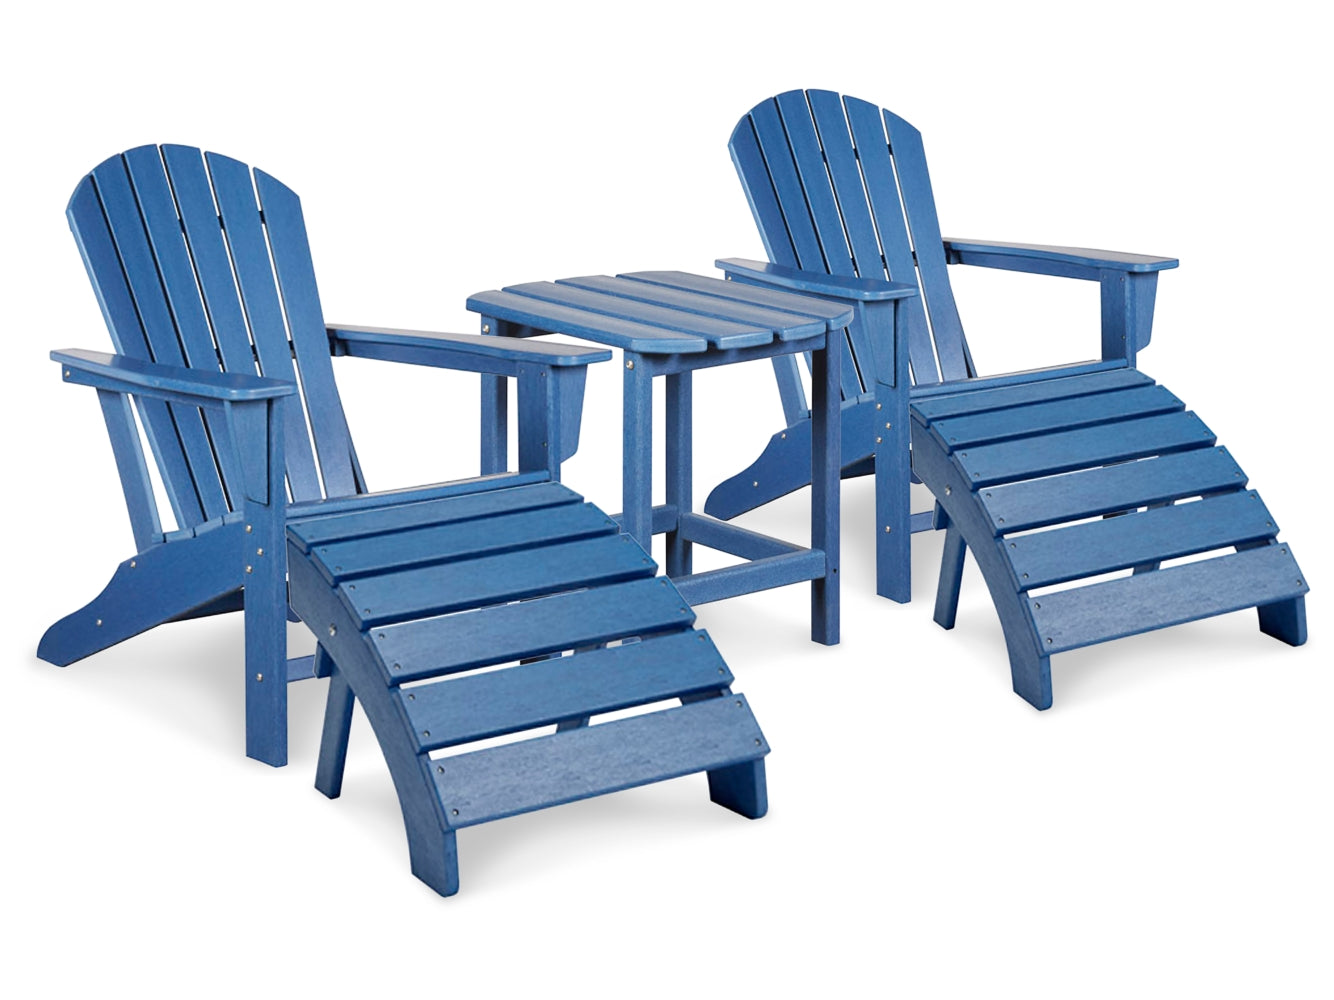 Sundown Treasure 2 Outdoor Adirondack Chairs and Ottomans with Side Table - furniture place usa